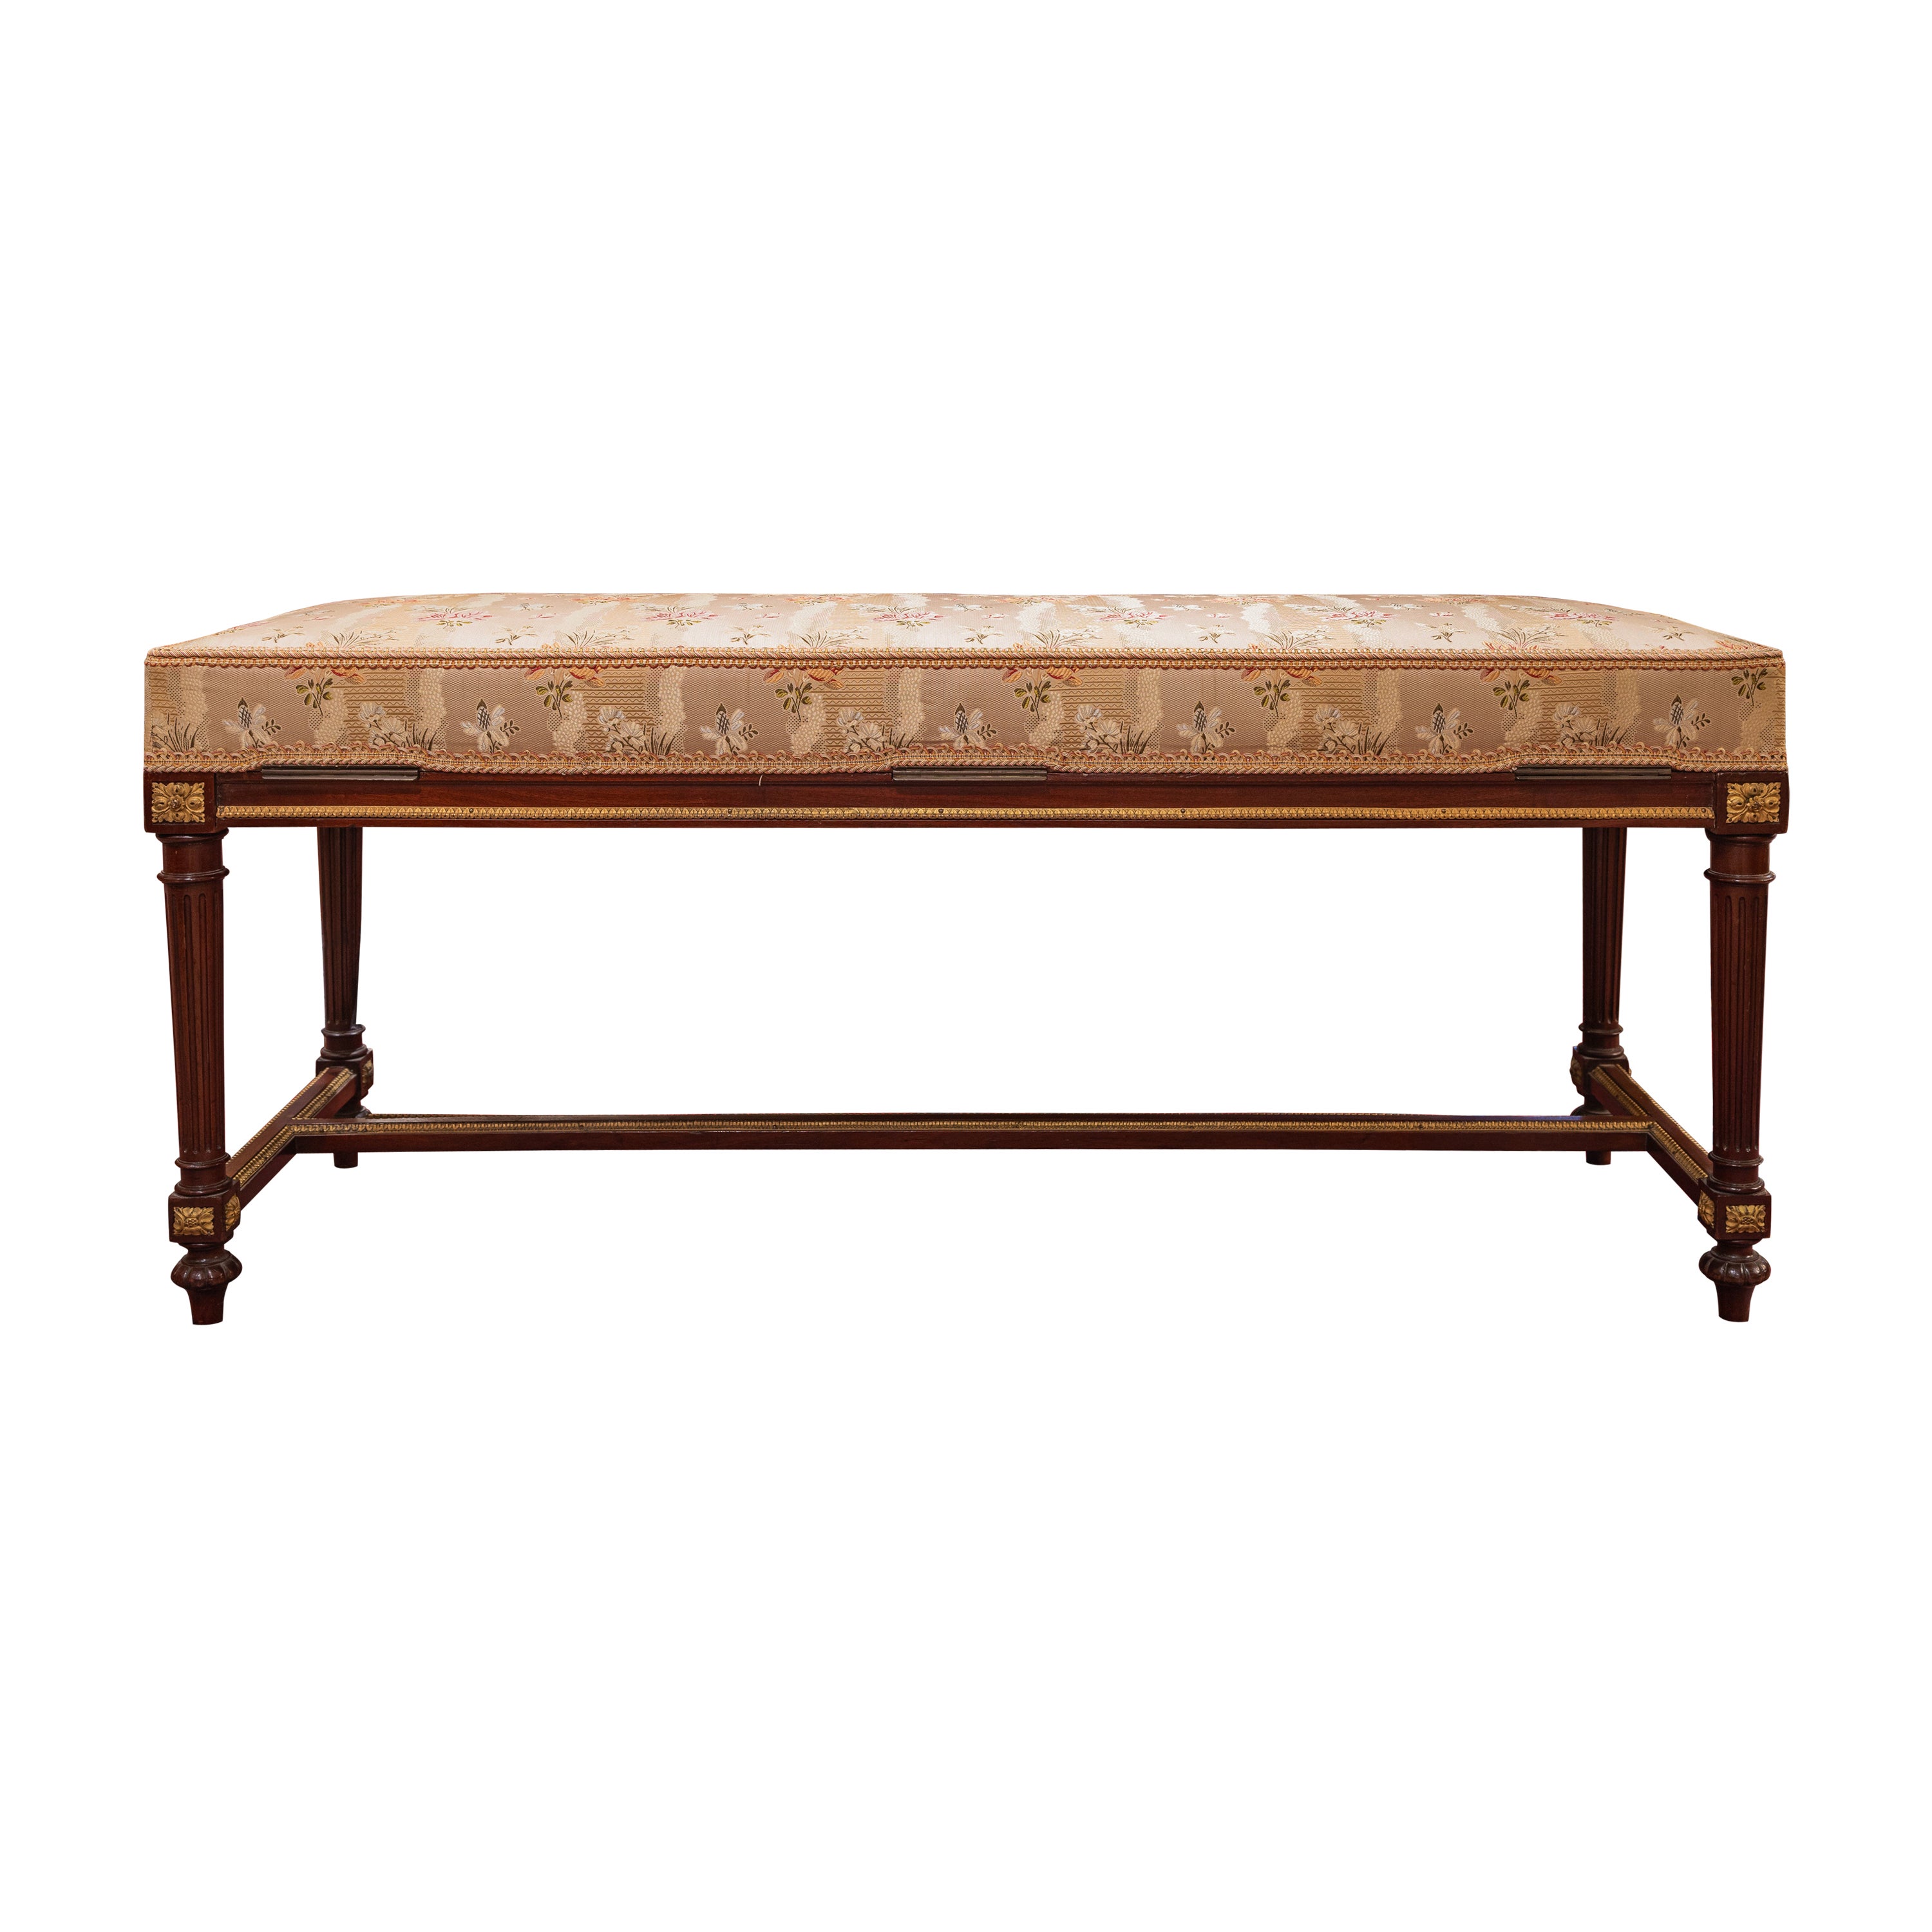 A very fine and rare 19th century Louis XVI gilt bronze mounted  bench